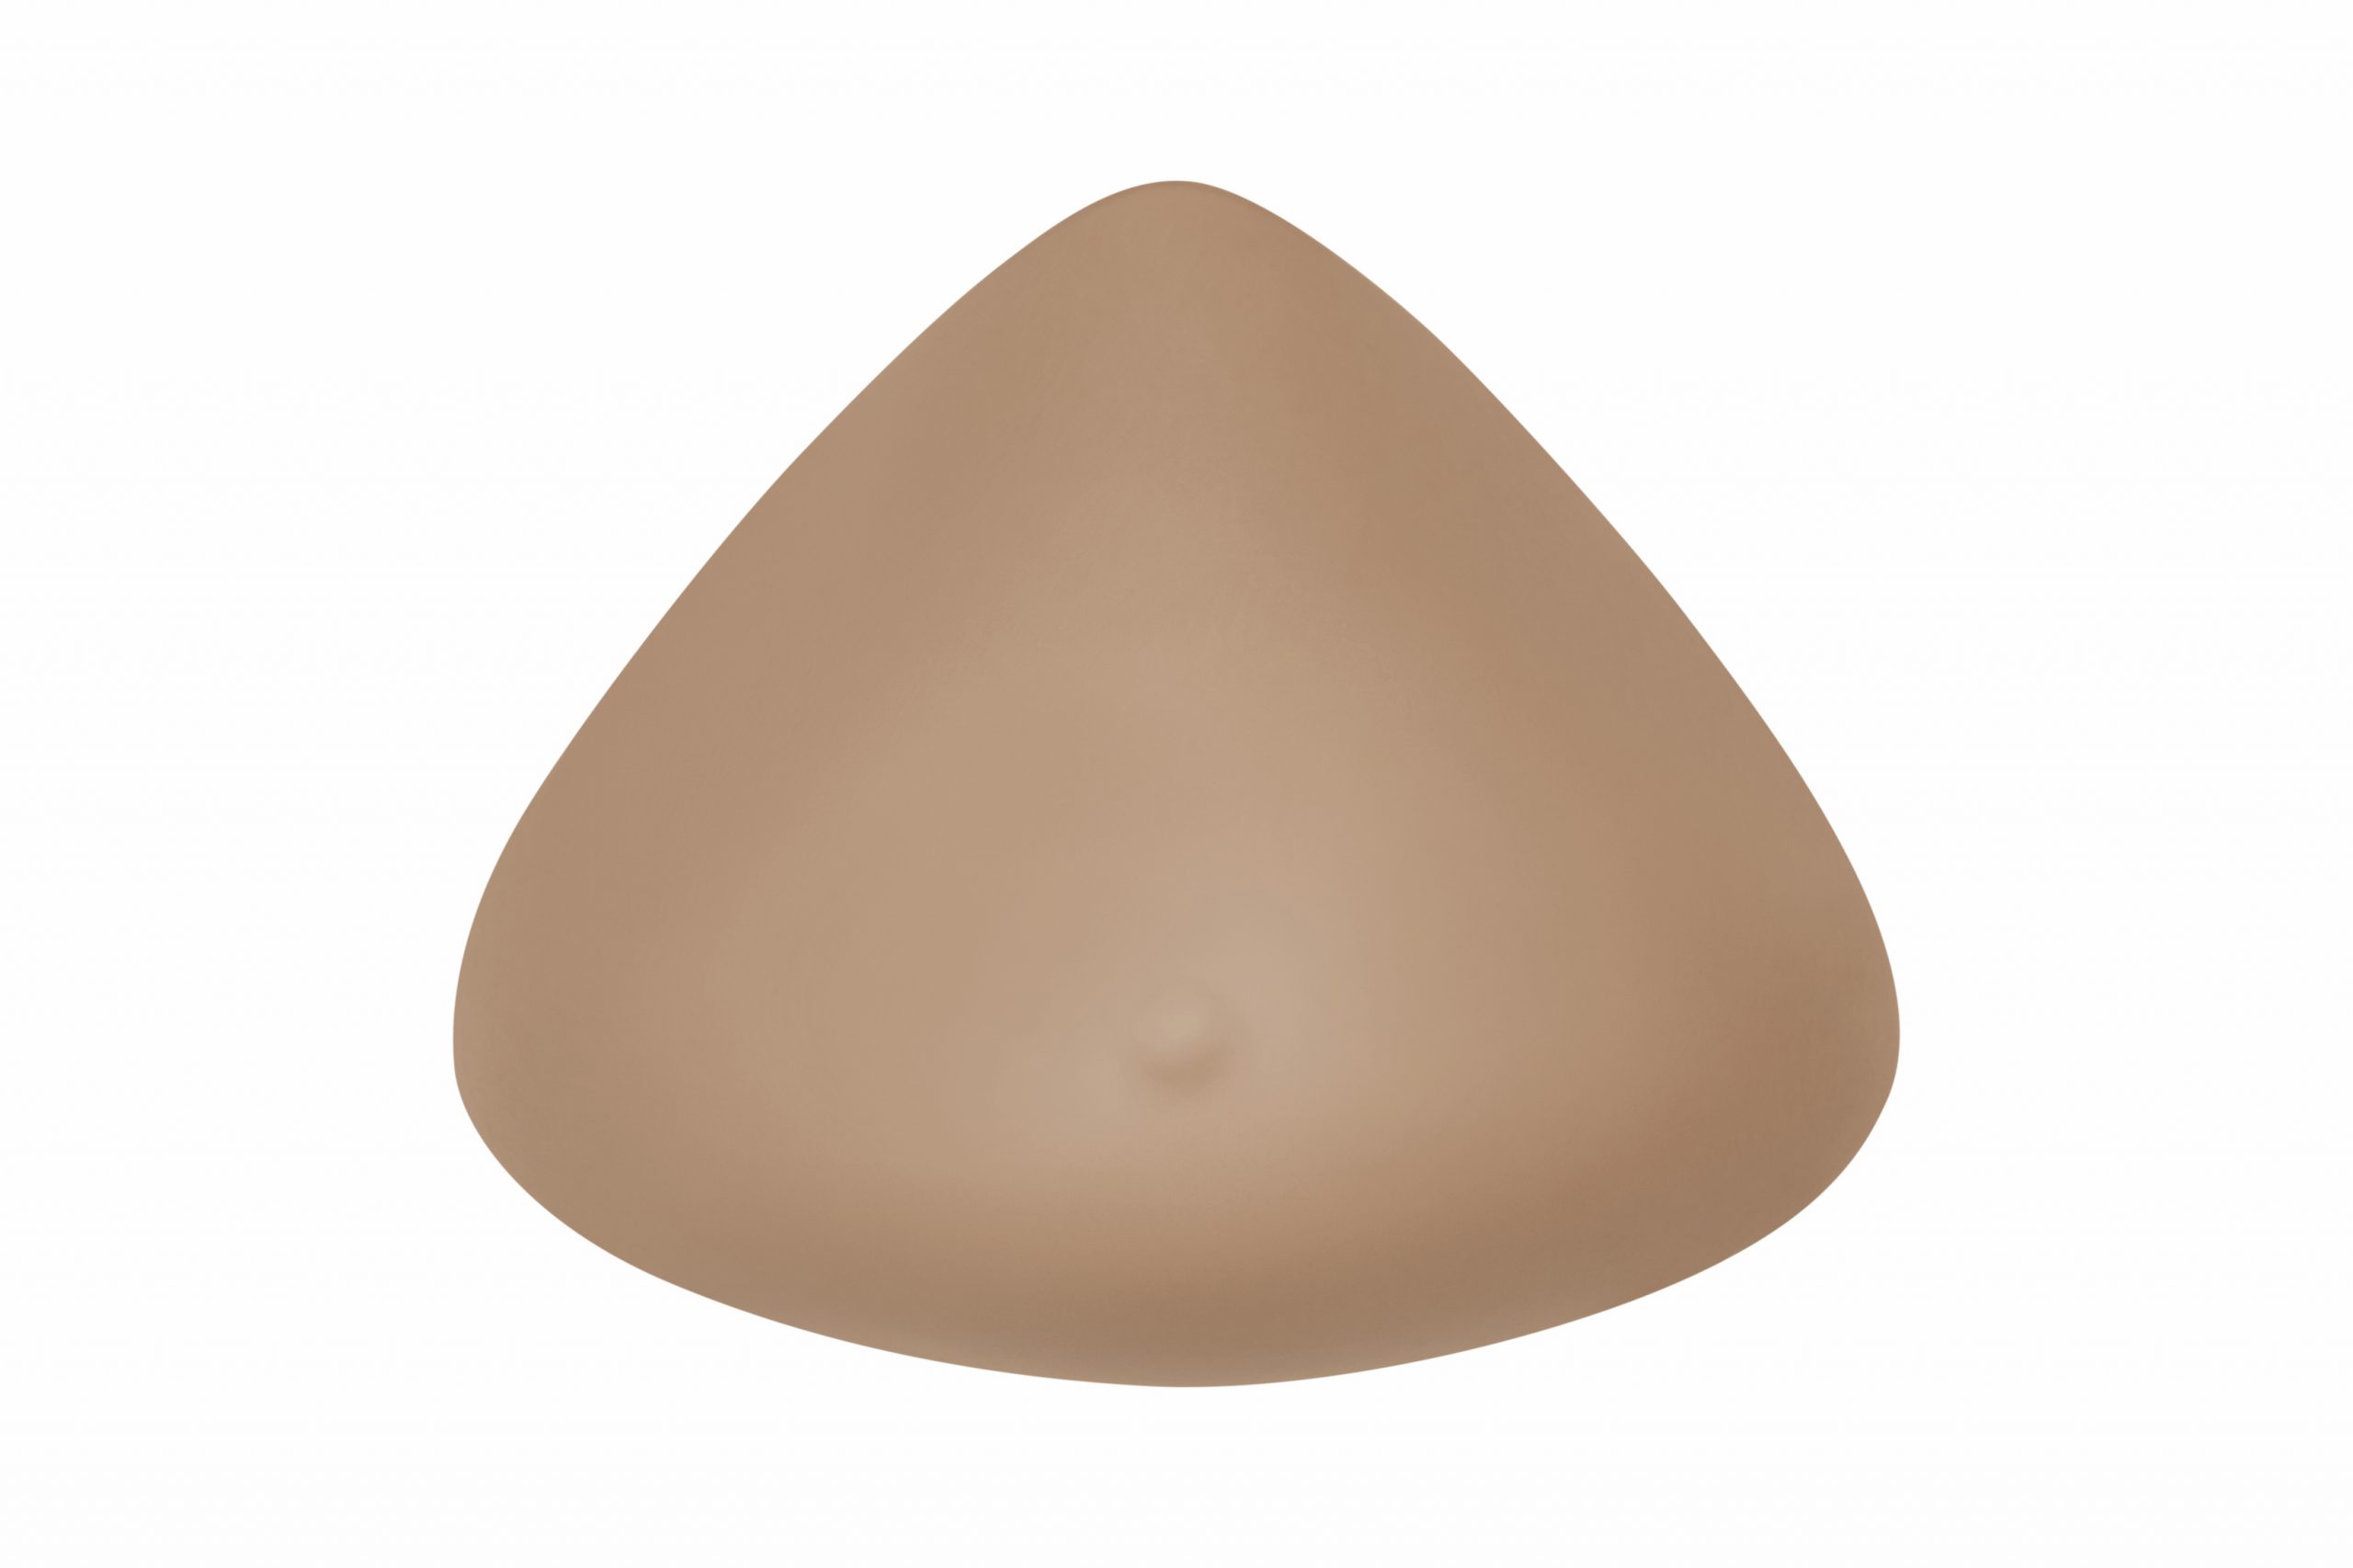 Buy Amoena Cotton Breast Prosthesis Form Covers for 2S & 3S